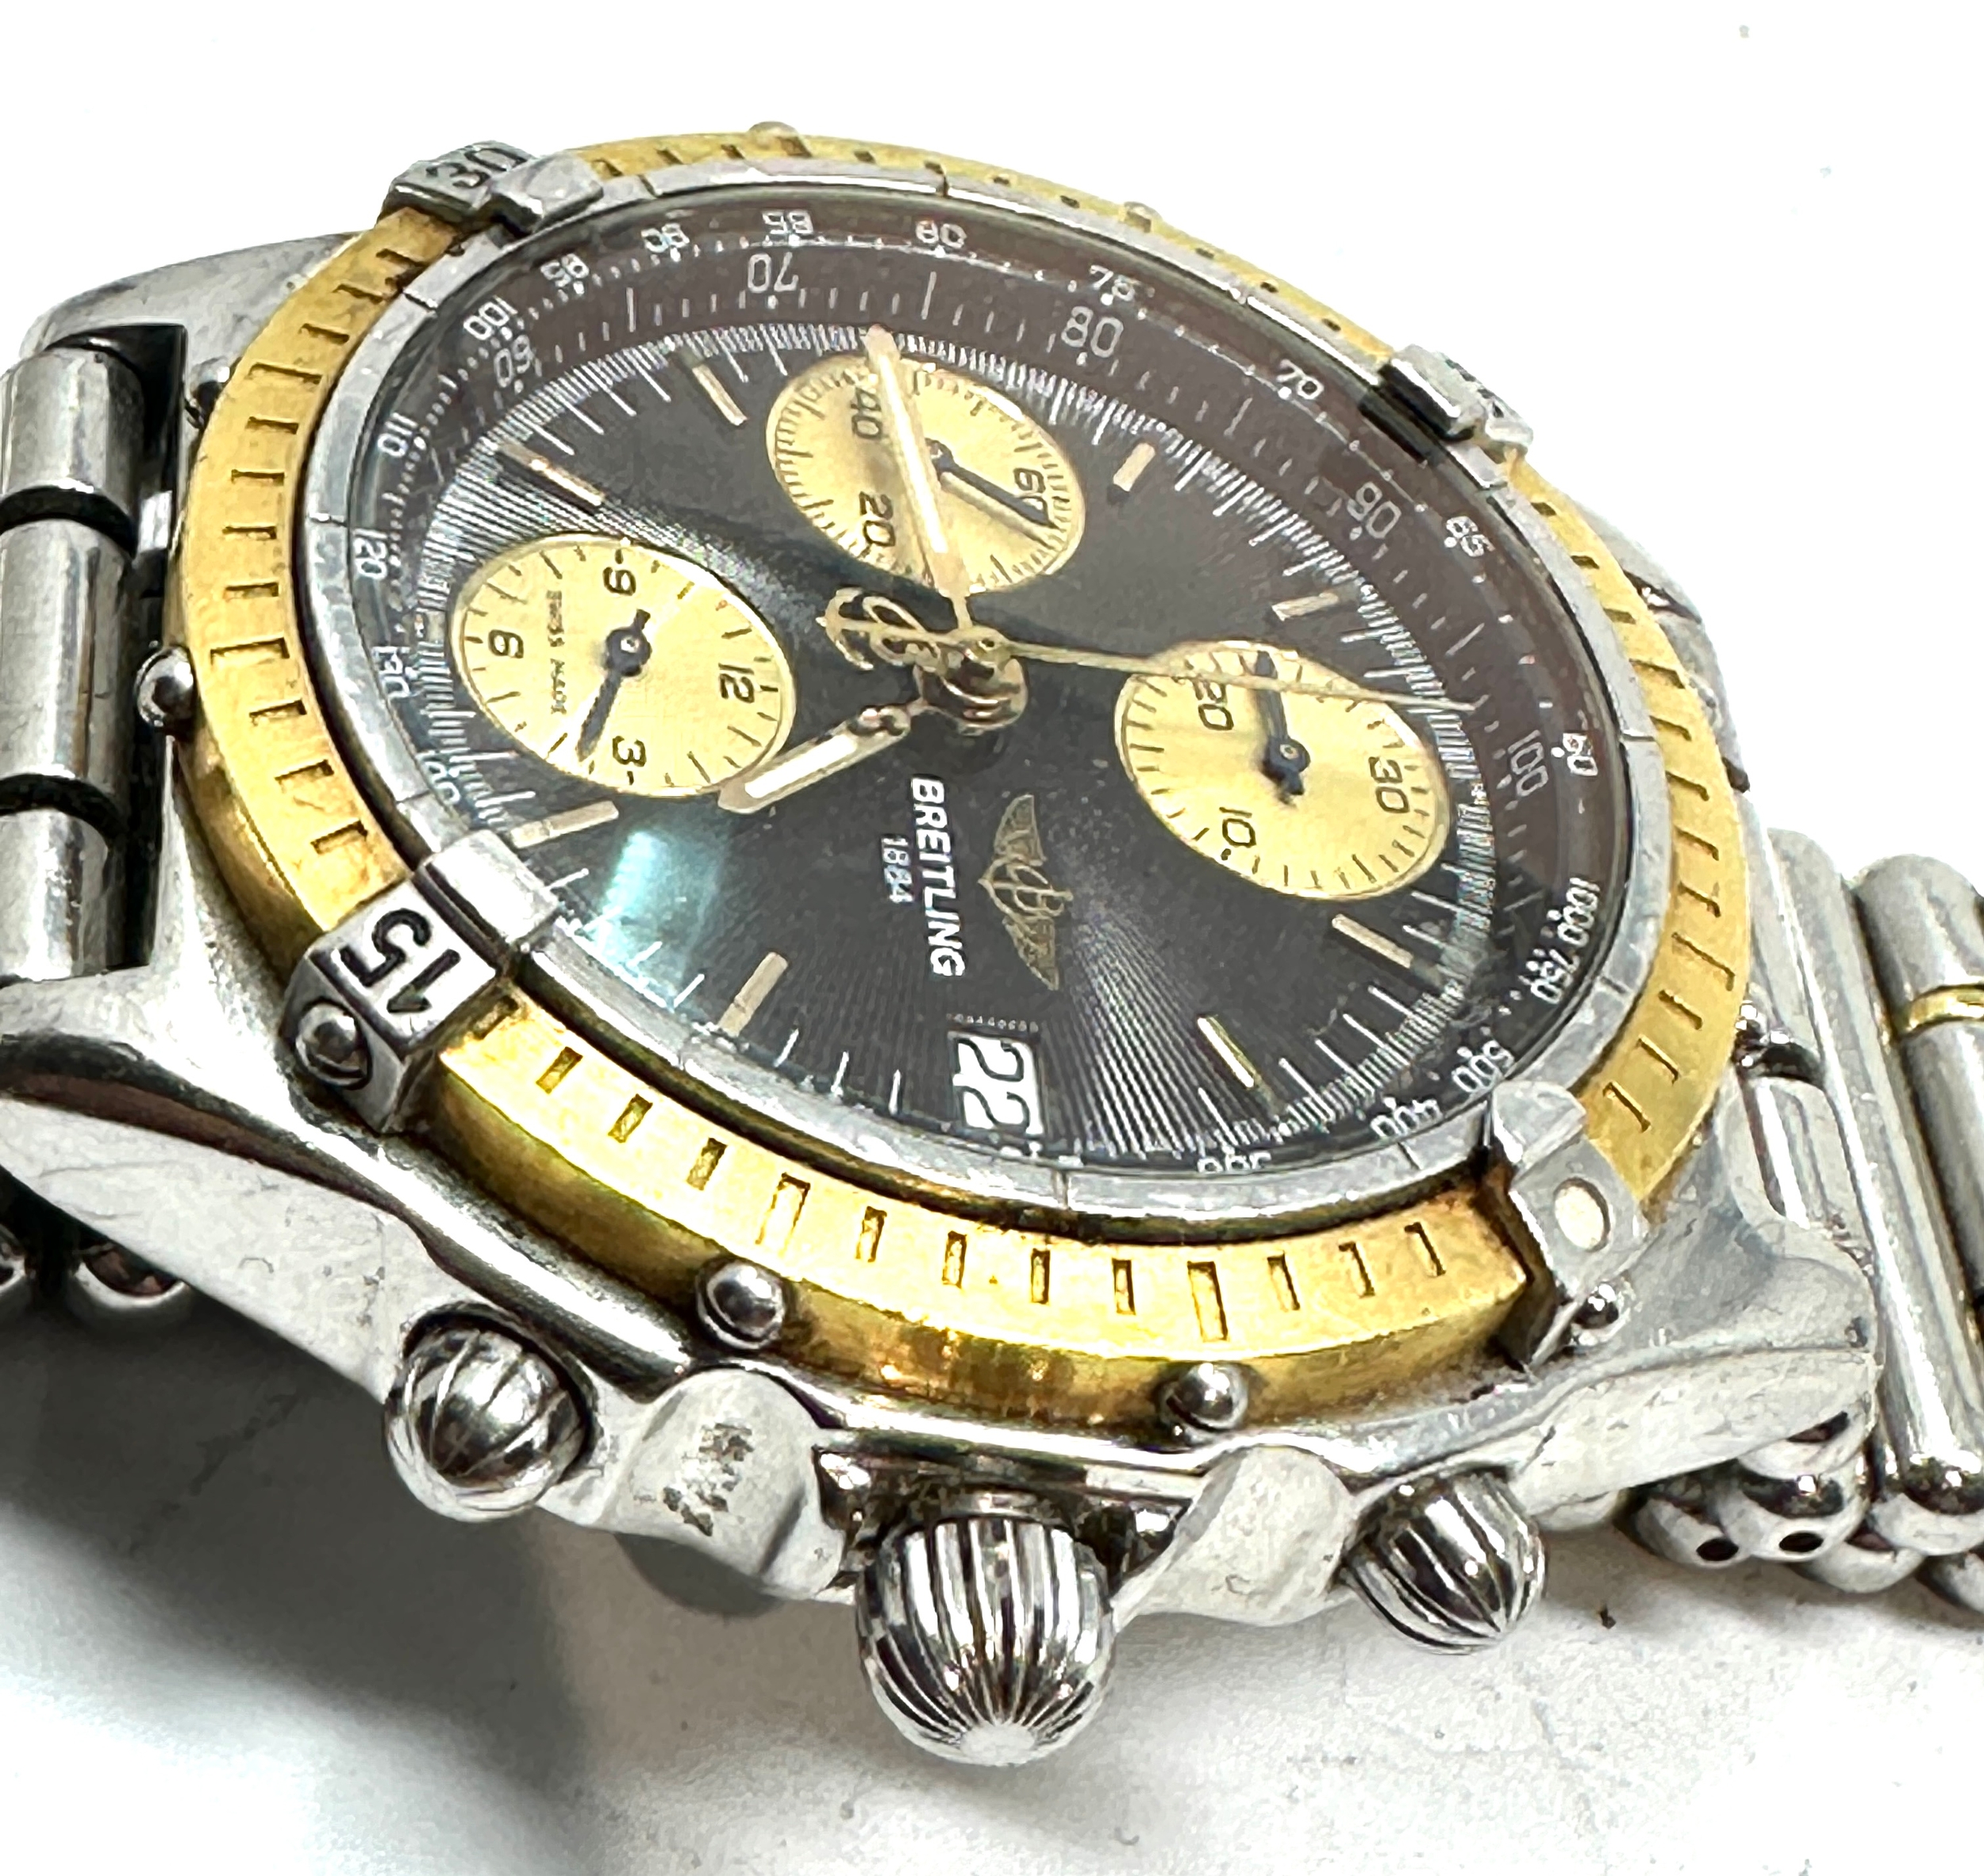 BREITLING 1884 chronograph steel / gold automatic gents wristwatch D130487the watch is ticking - Image 2 of 7